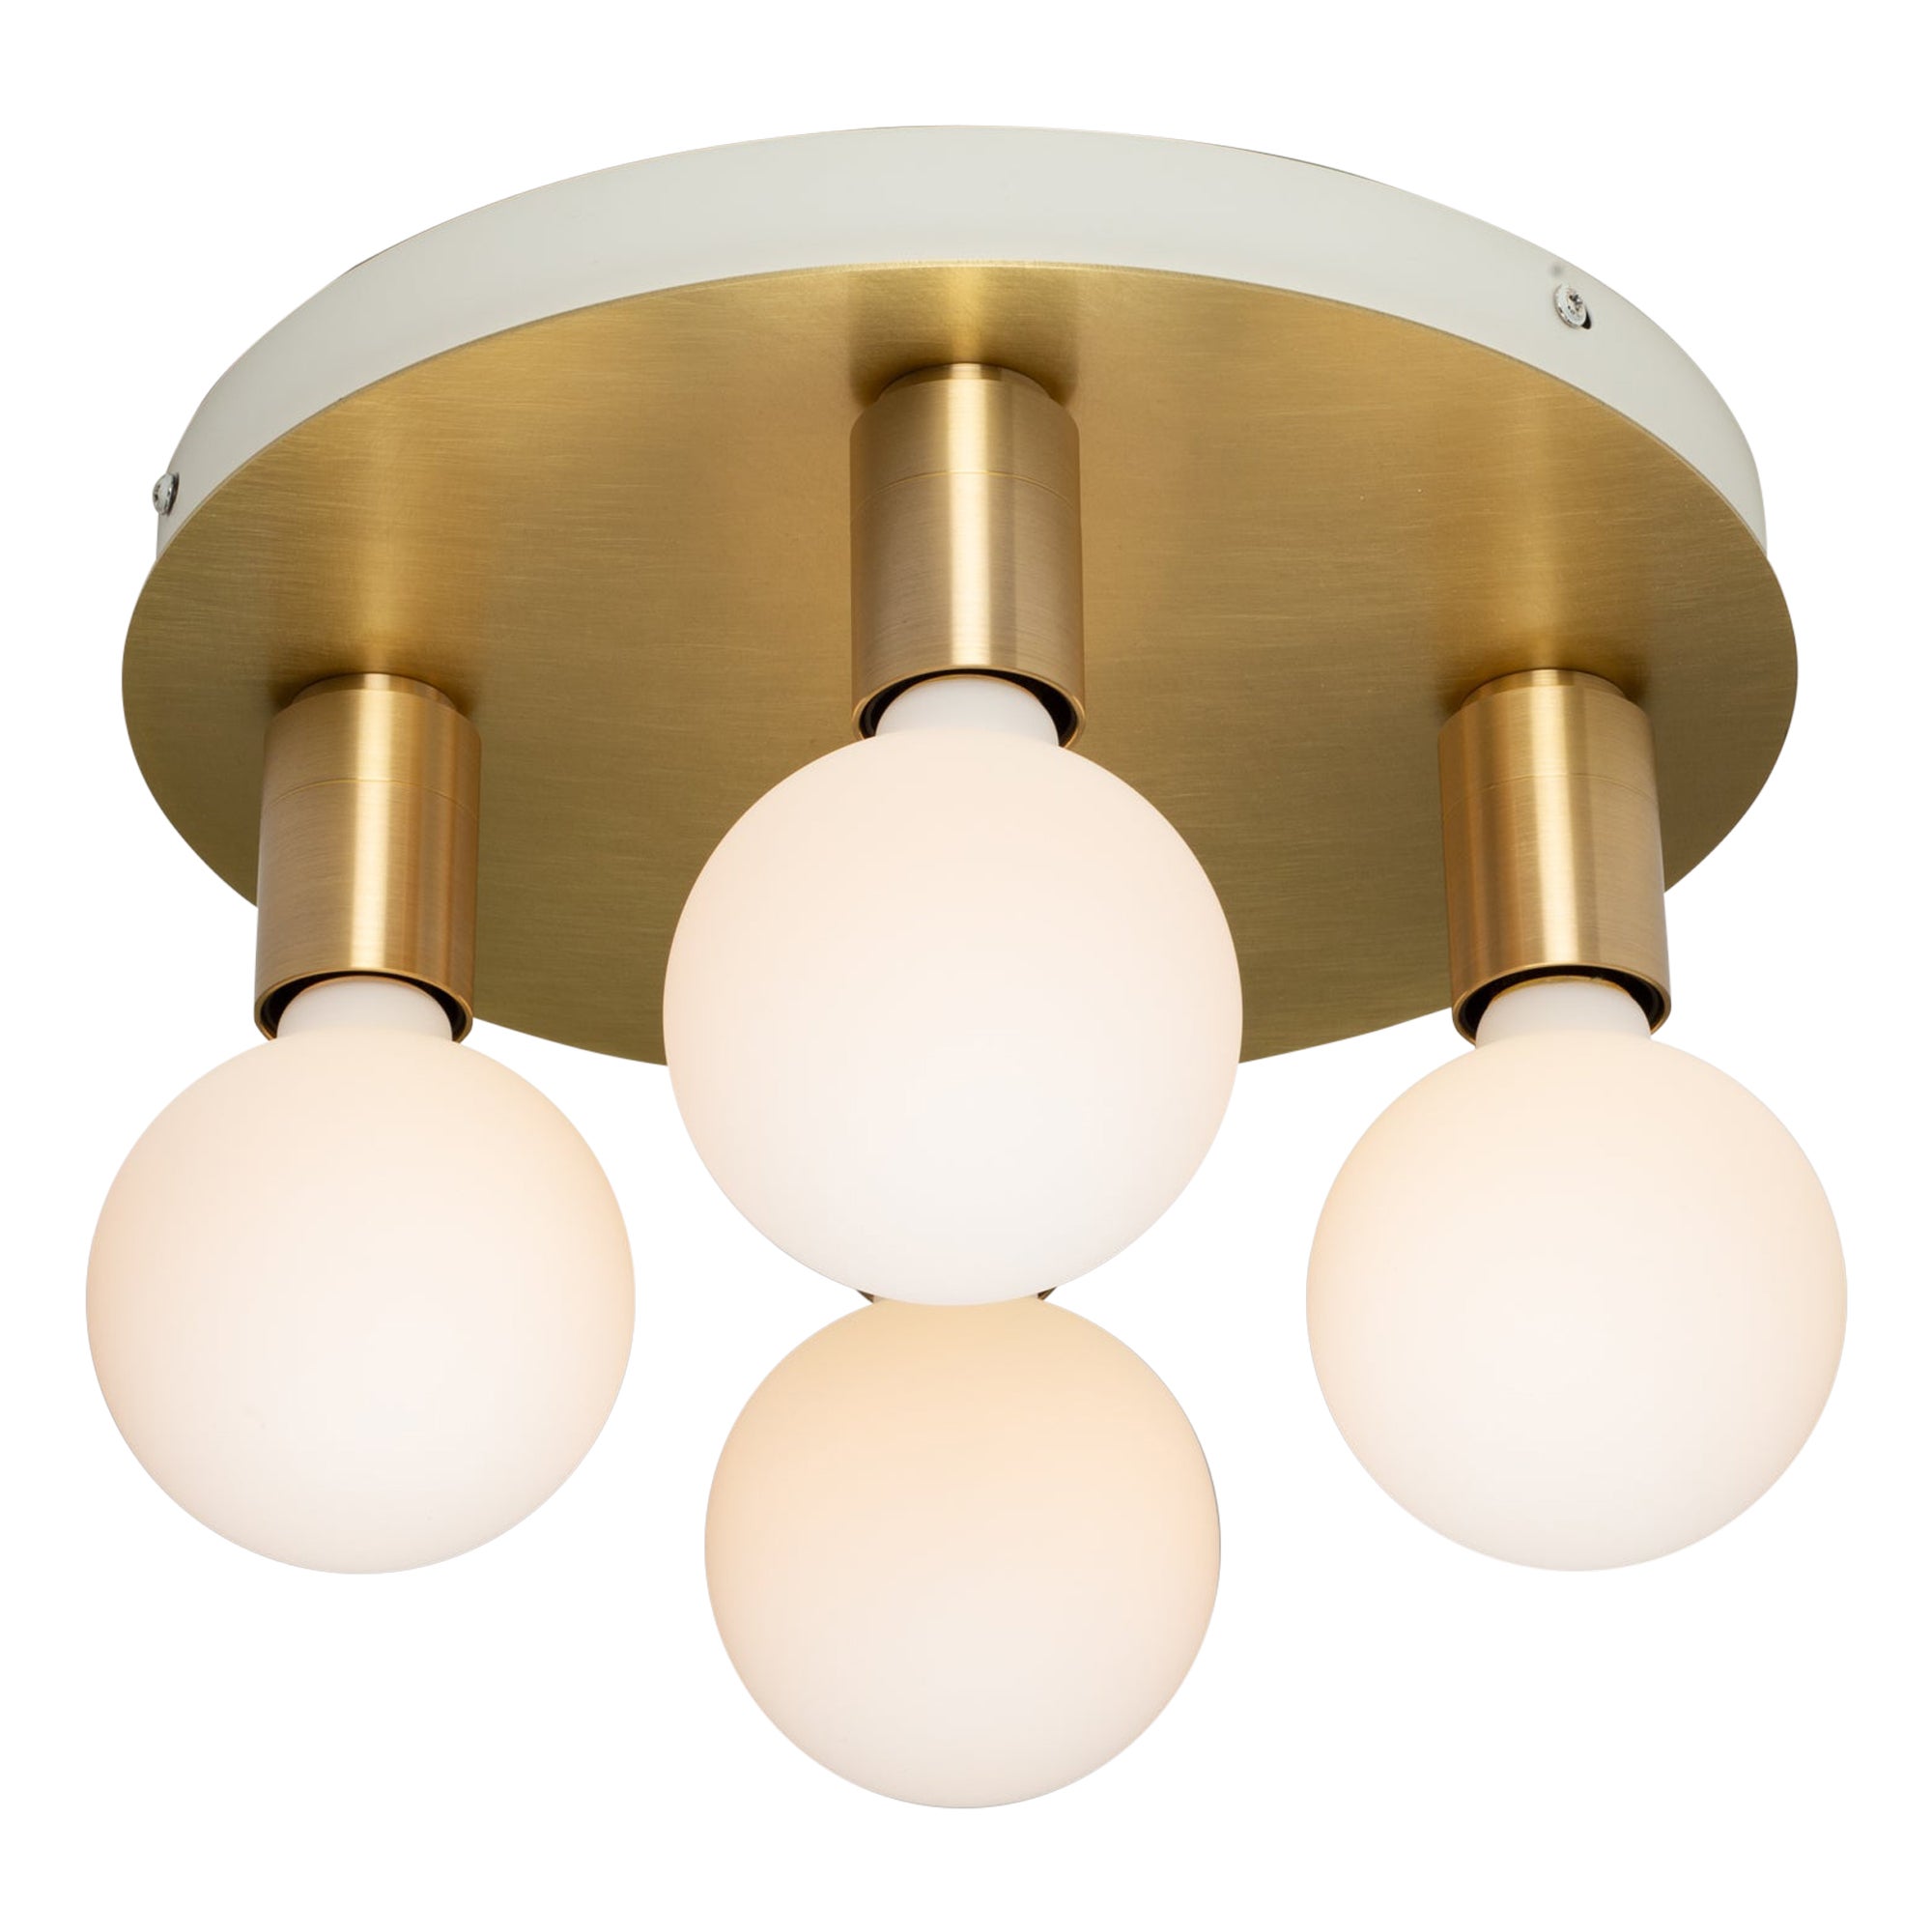 Four Sphere Brushed Brass Ceiling Light For Sale